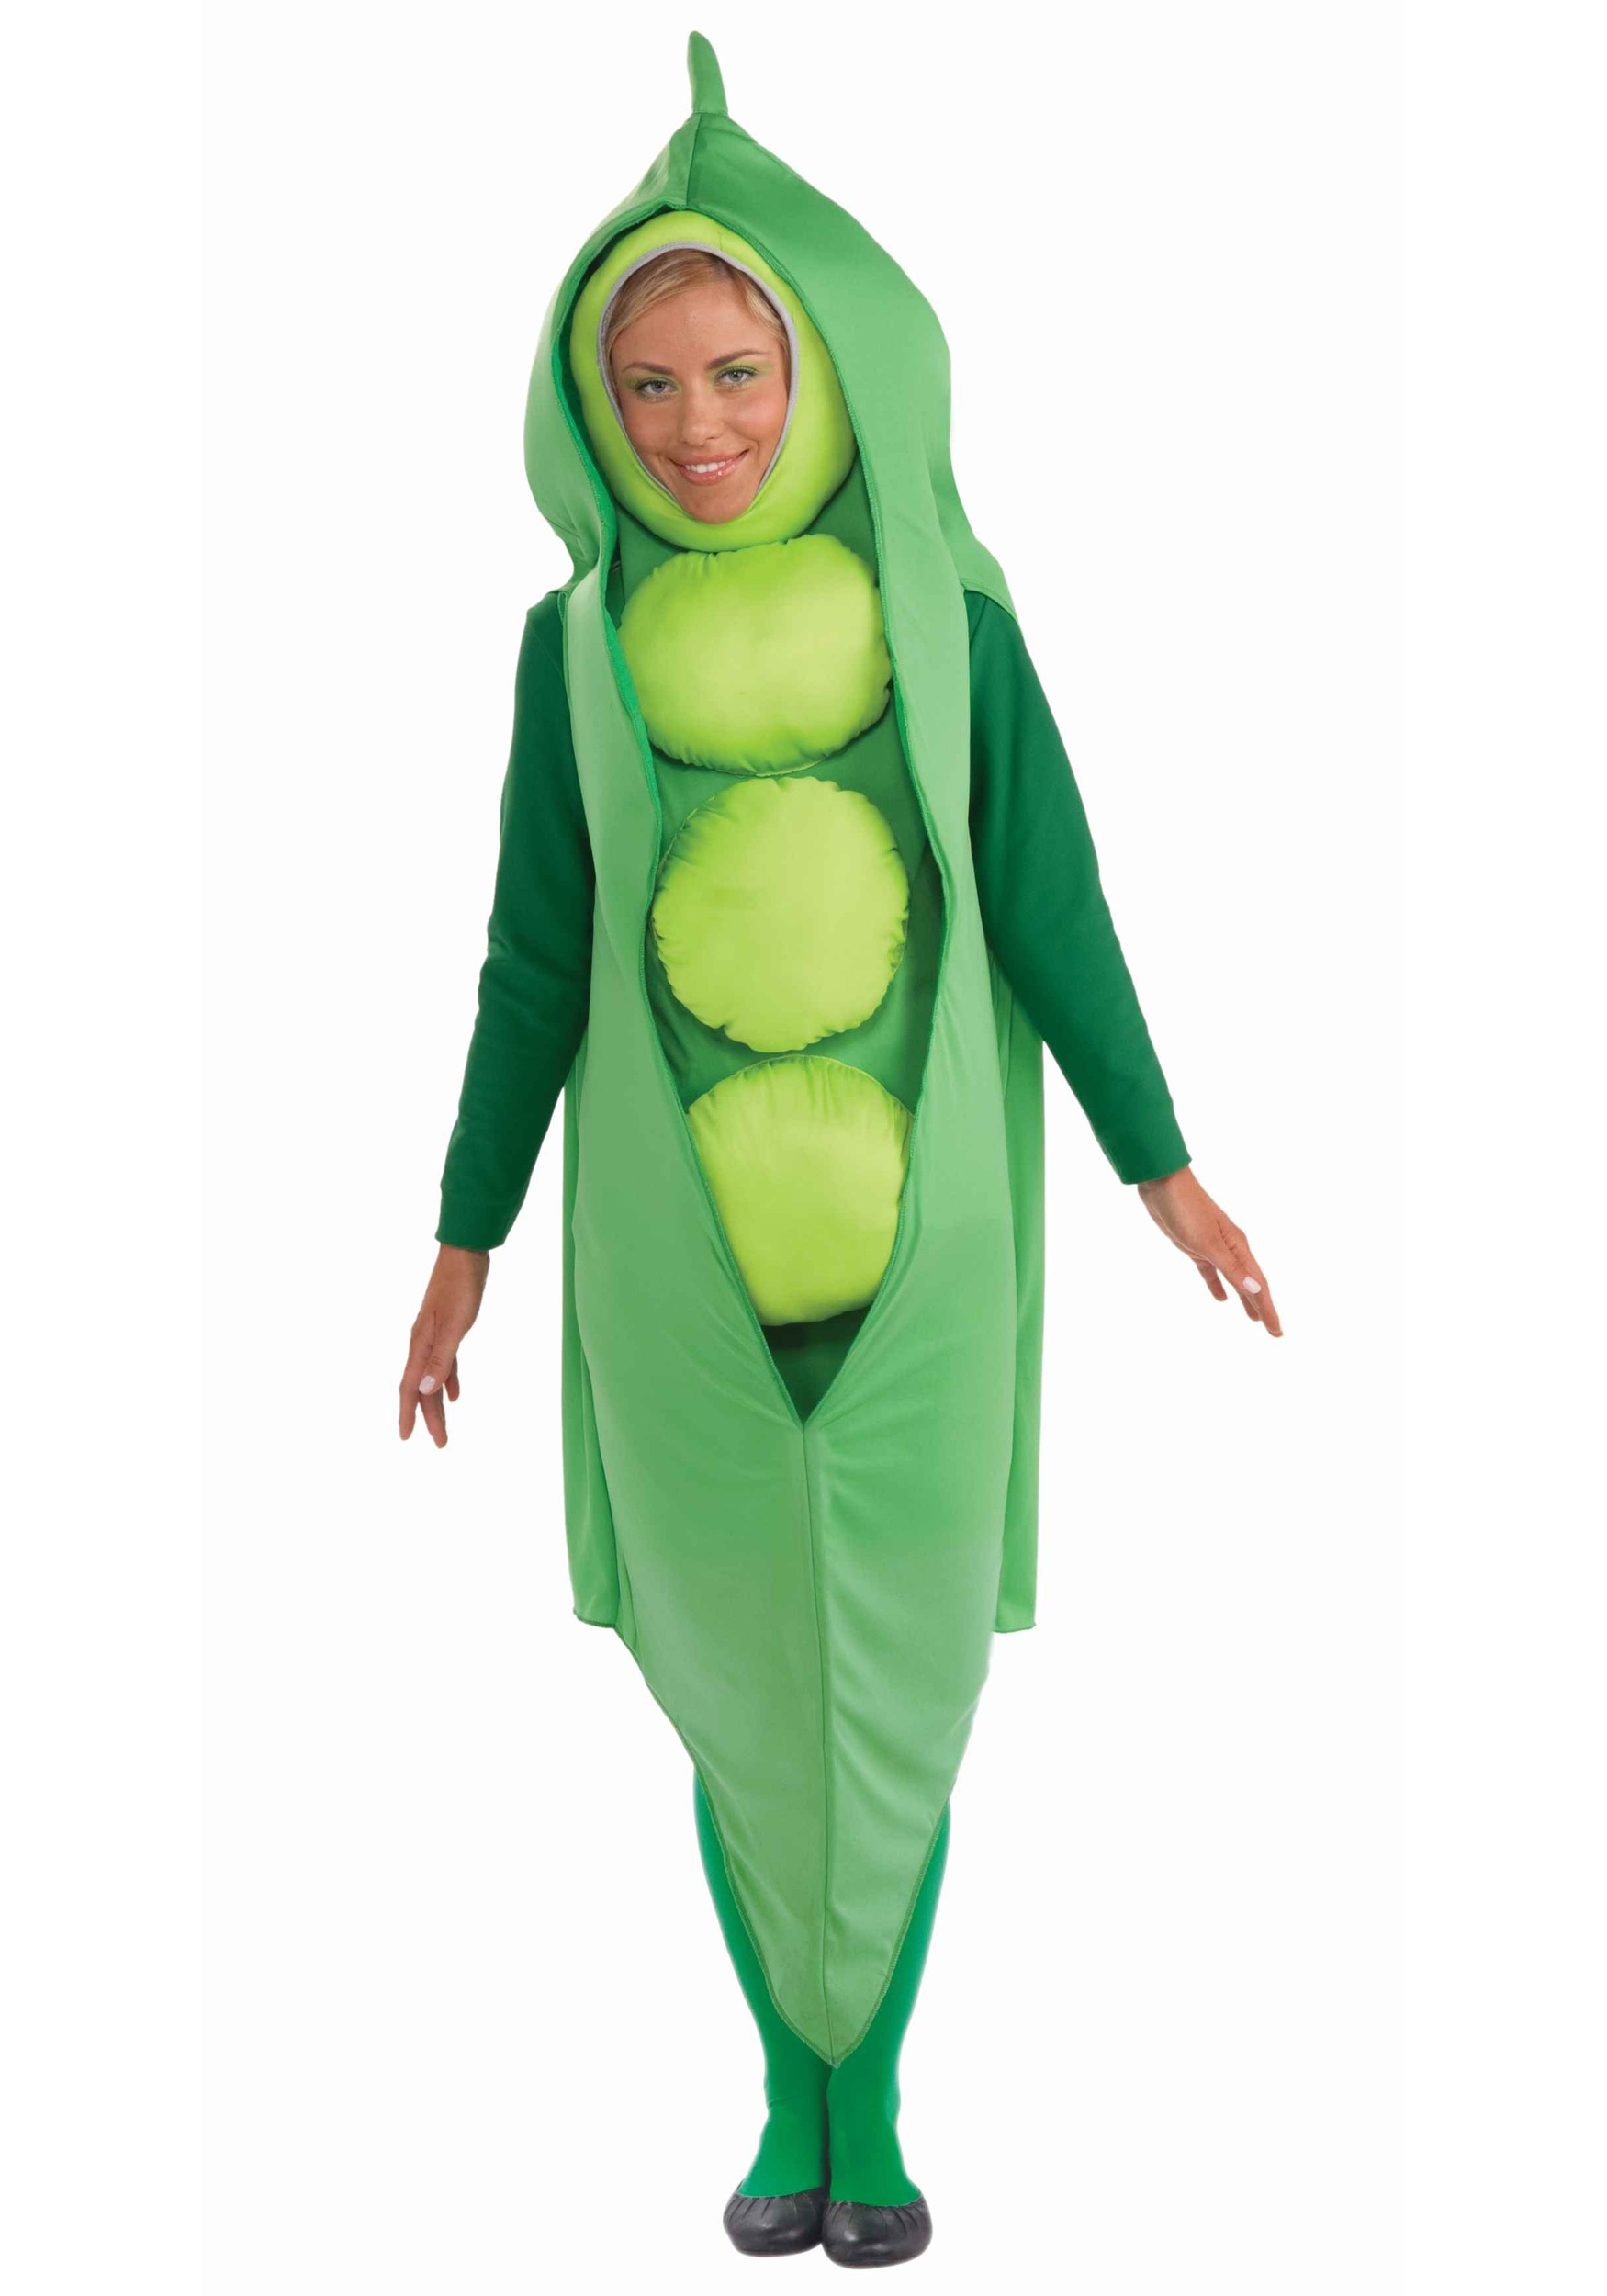 Peas Costume For Grown Ups